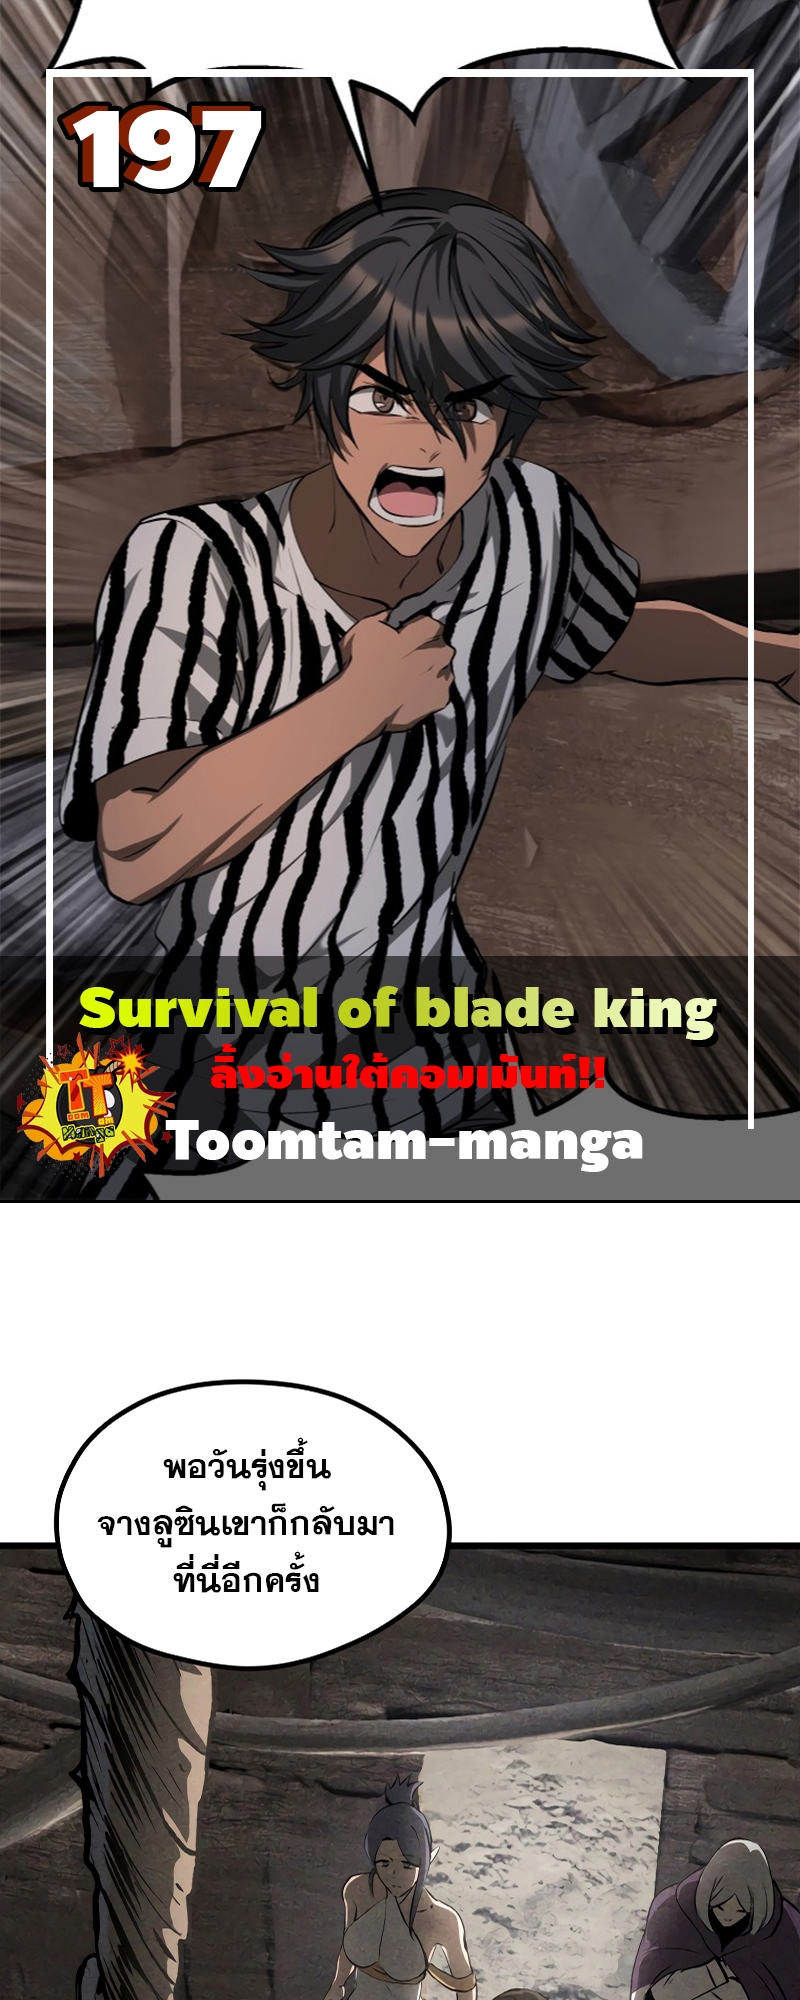 Survival of blade king 197 23 03 25670001